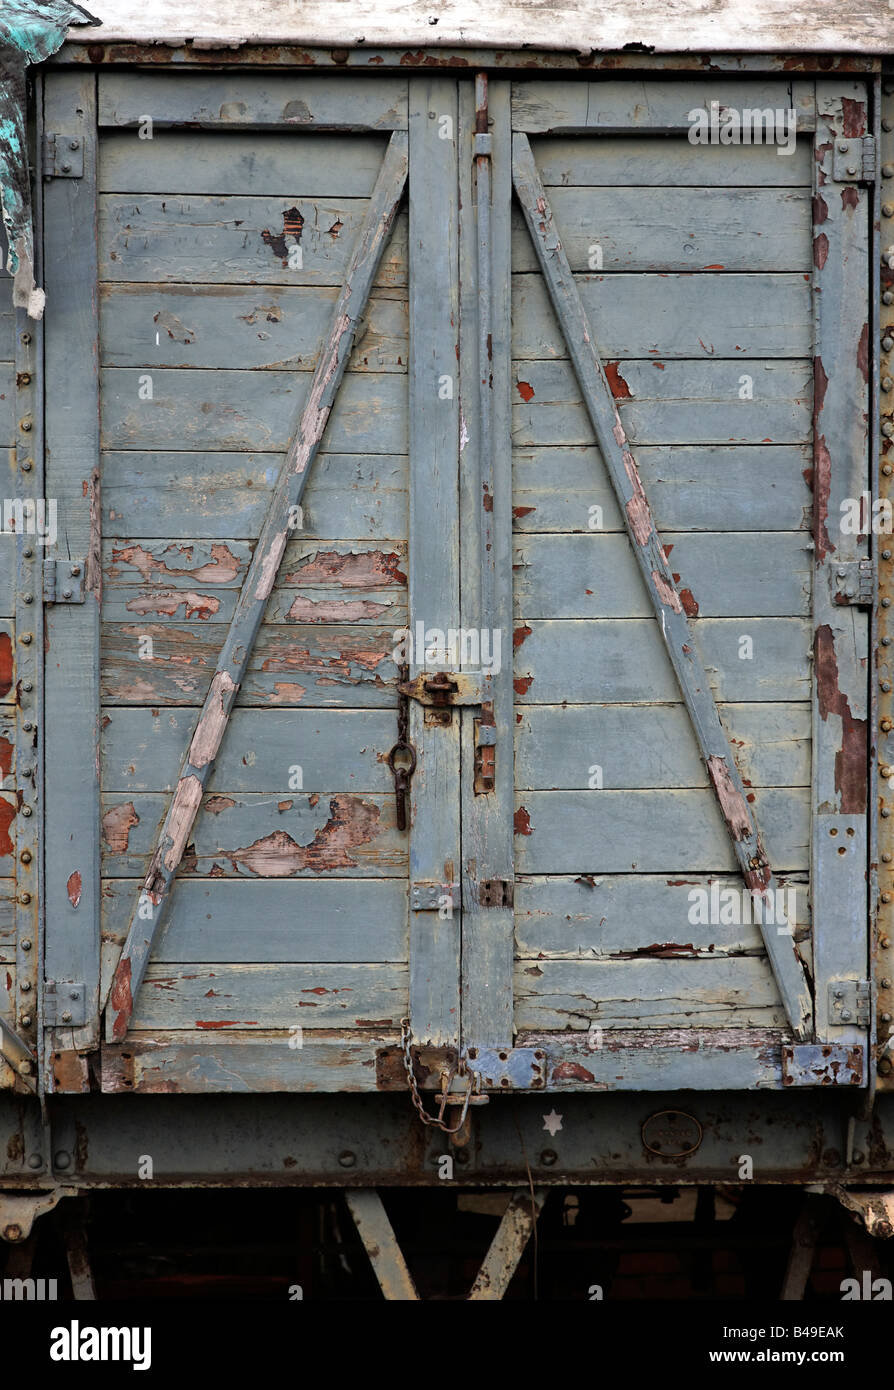 A wethered rail wagon abandoned in a depot Stock Photo